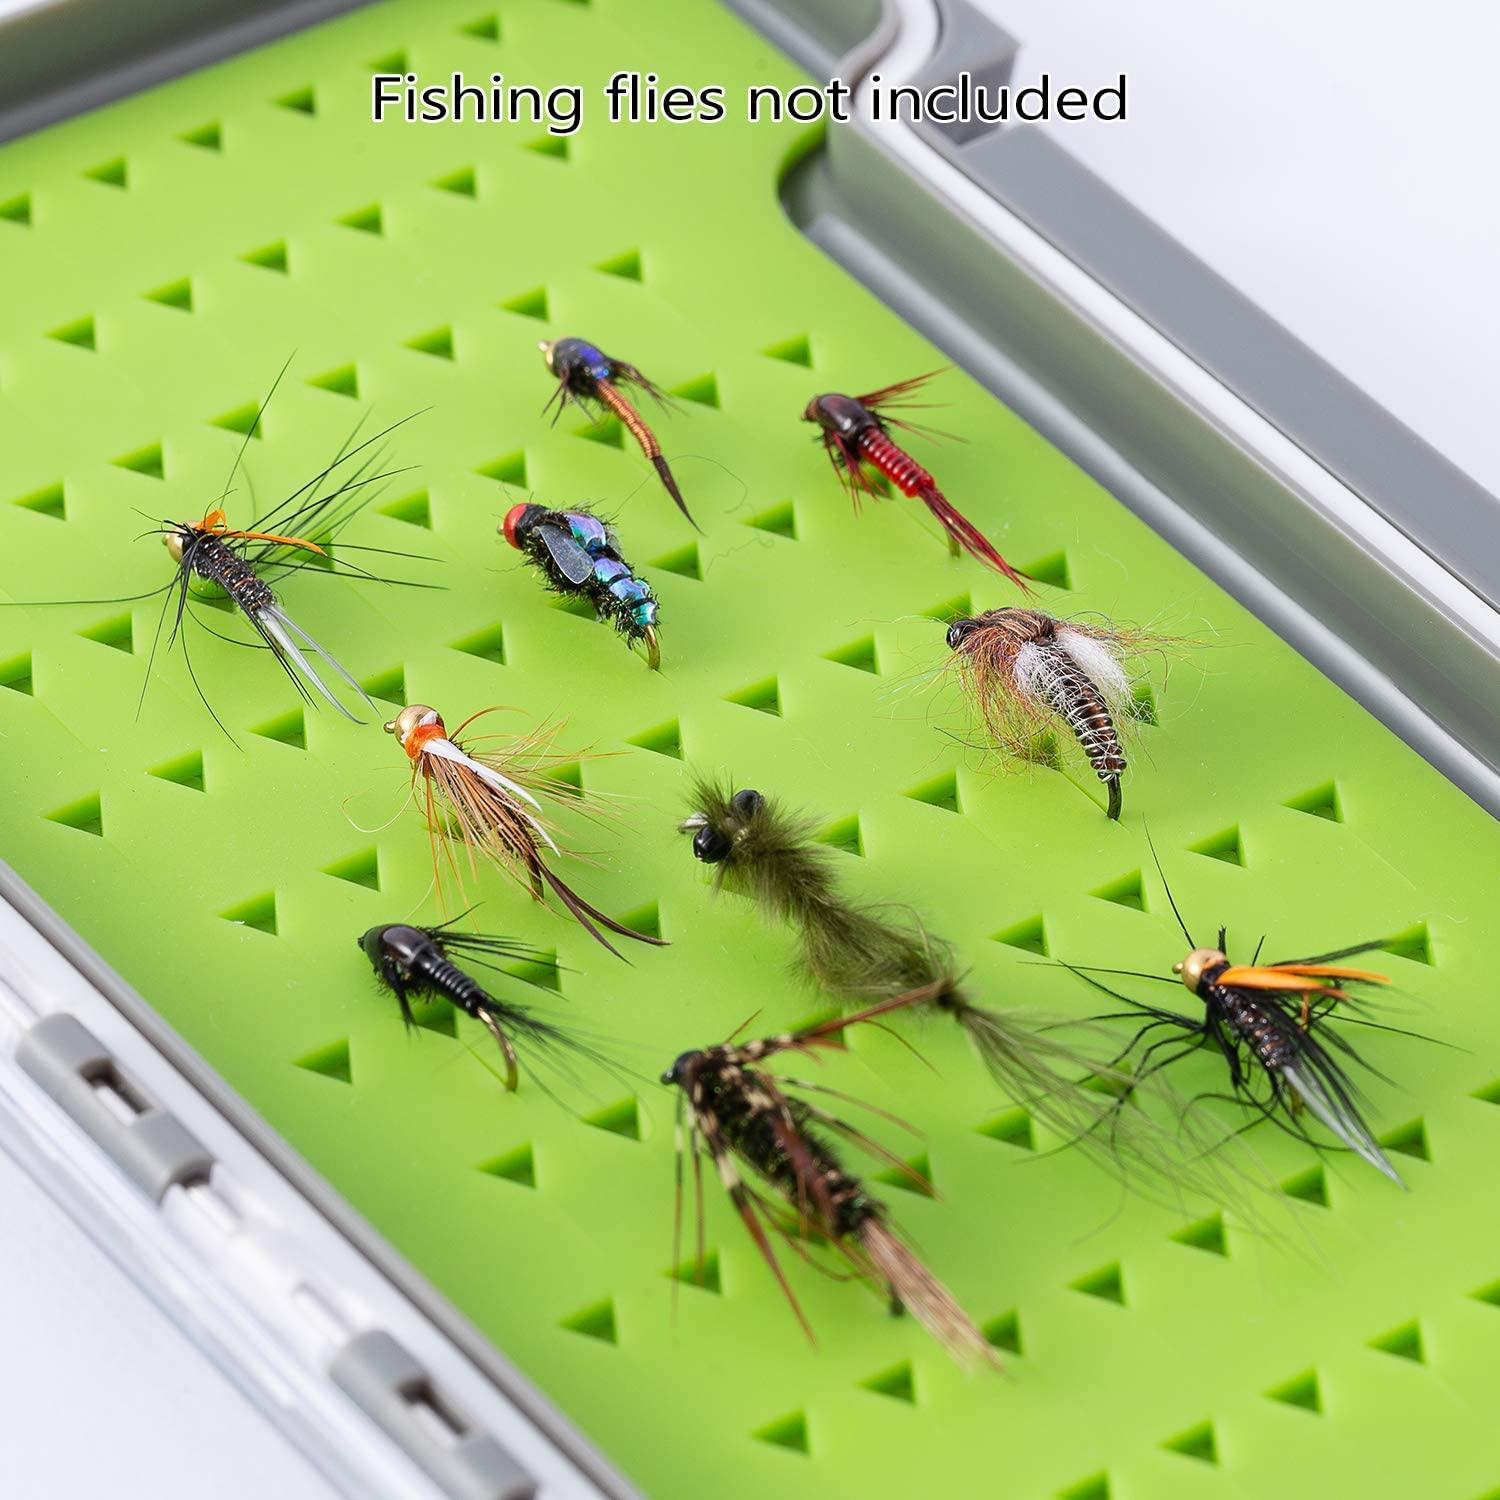 Bassdash Waterproof Fly Box Single/Double Sided Fishing Flies Storage With  Foam/Silicone Slits Insert Type 8 - 121 Silicone Slits 7.4x4.1x0.7